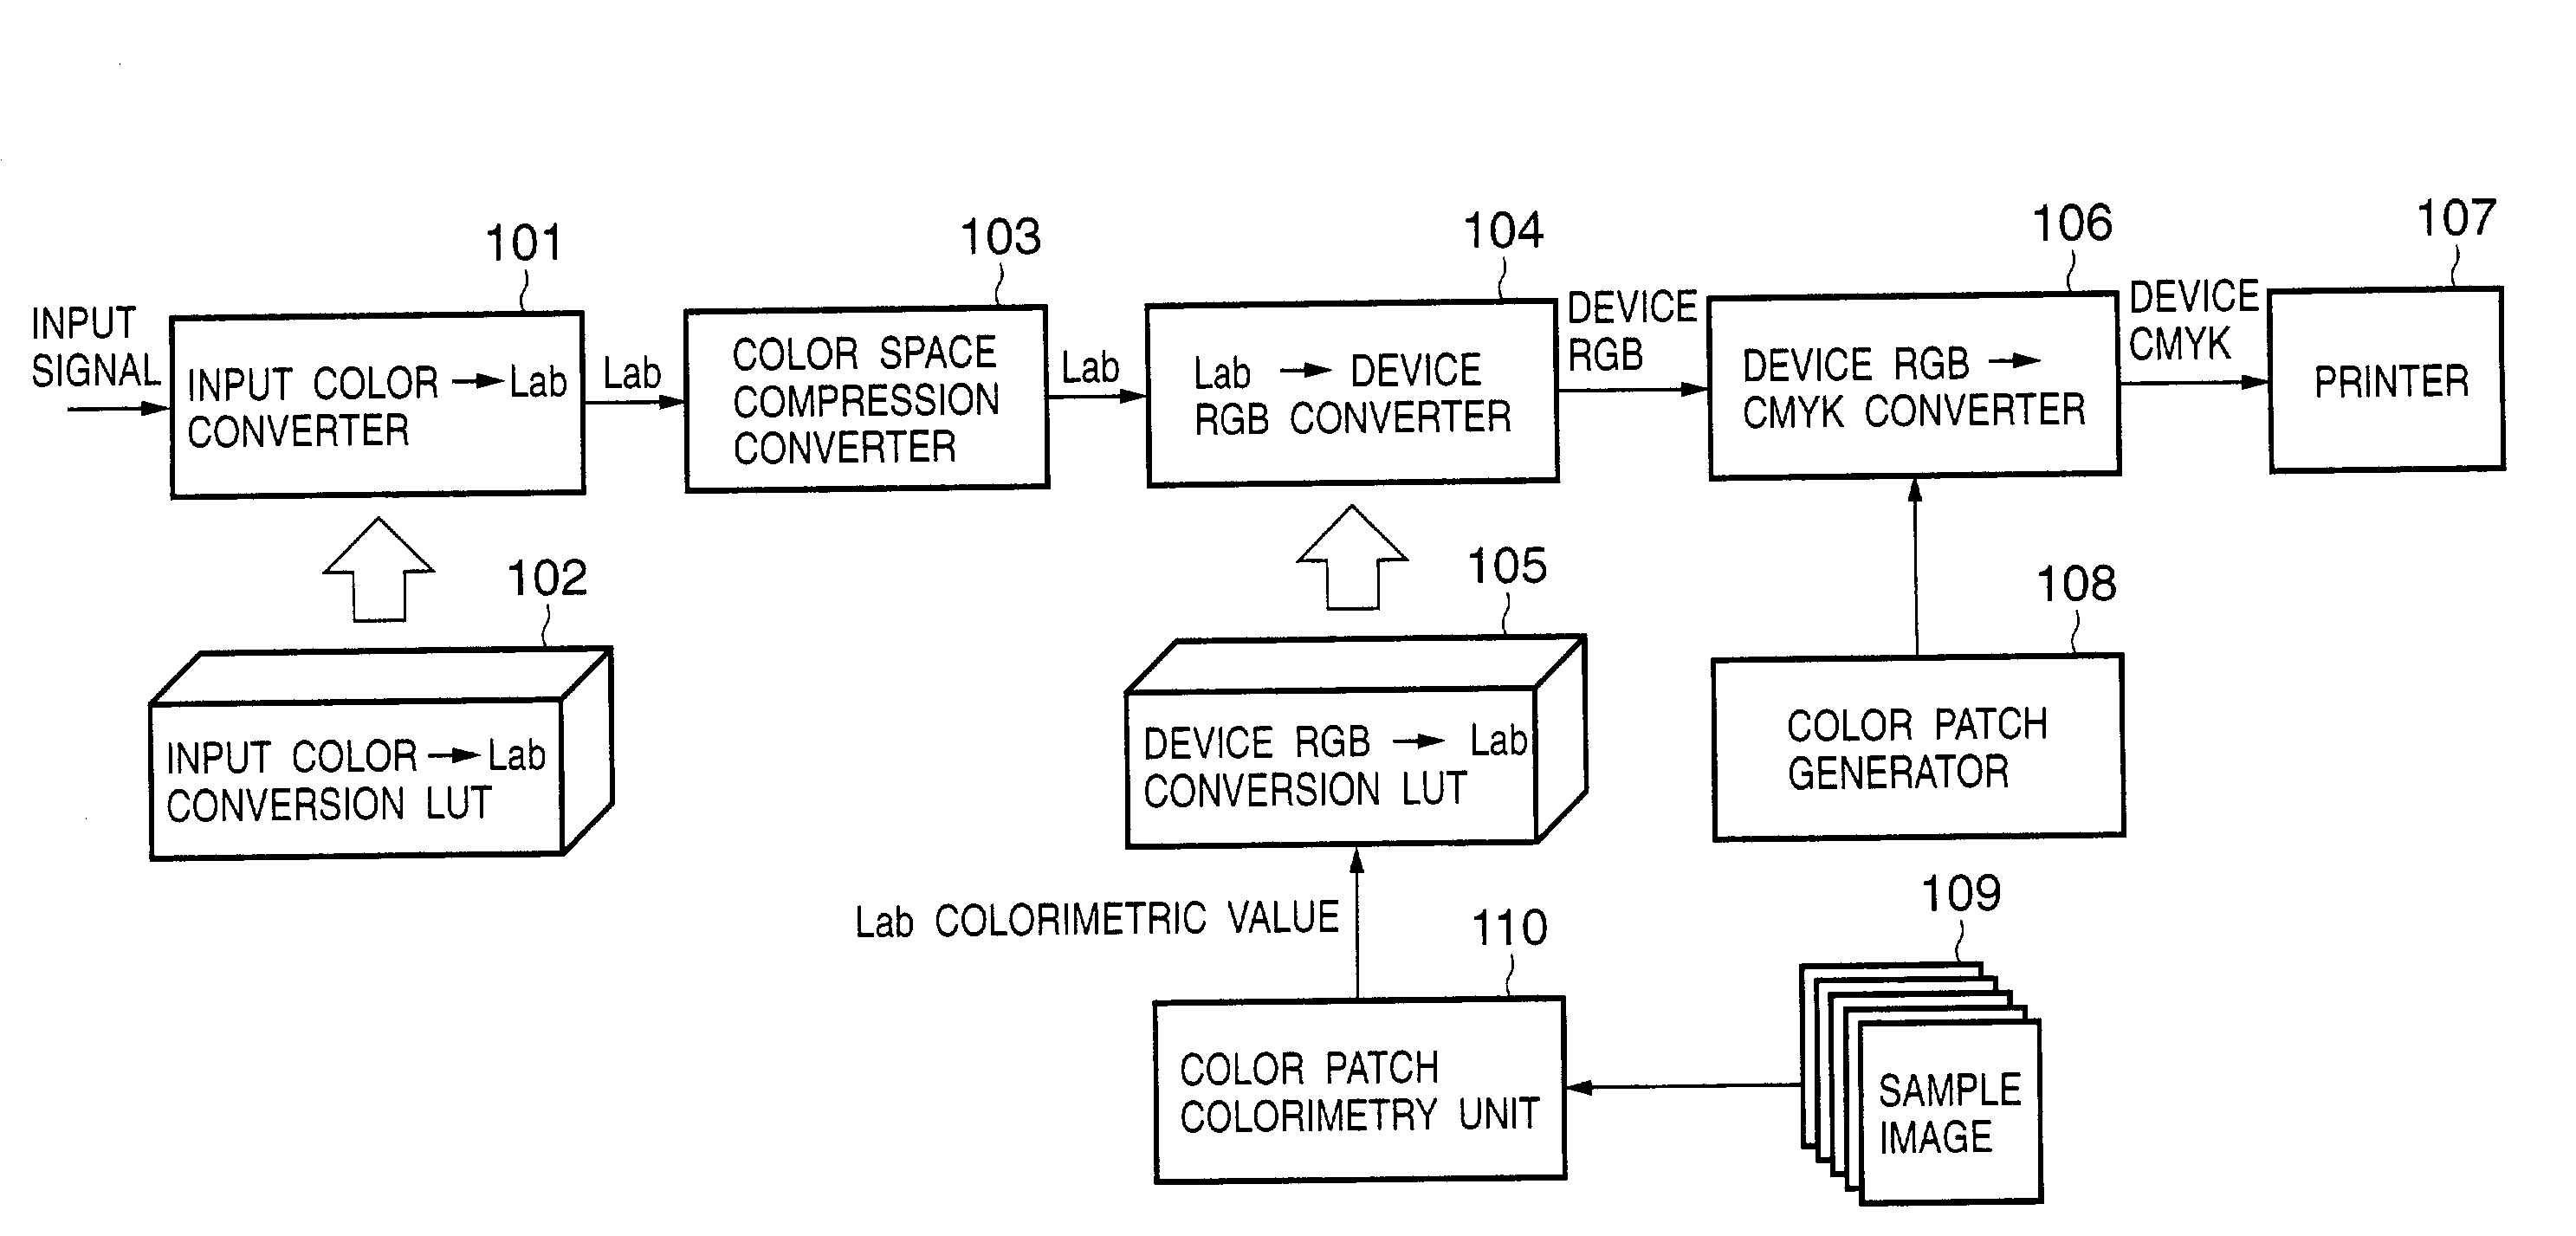 Image processing method and apparatus for color conversion accommodating device non-linearity